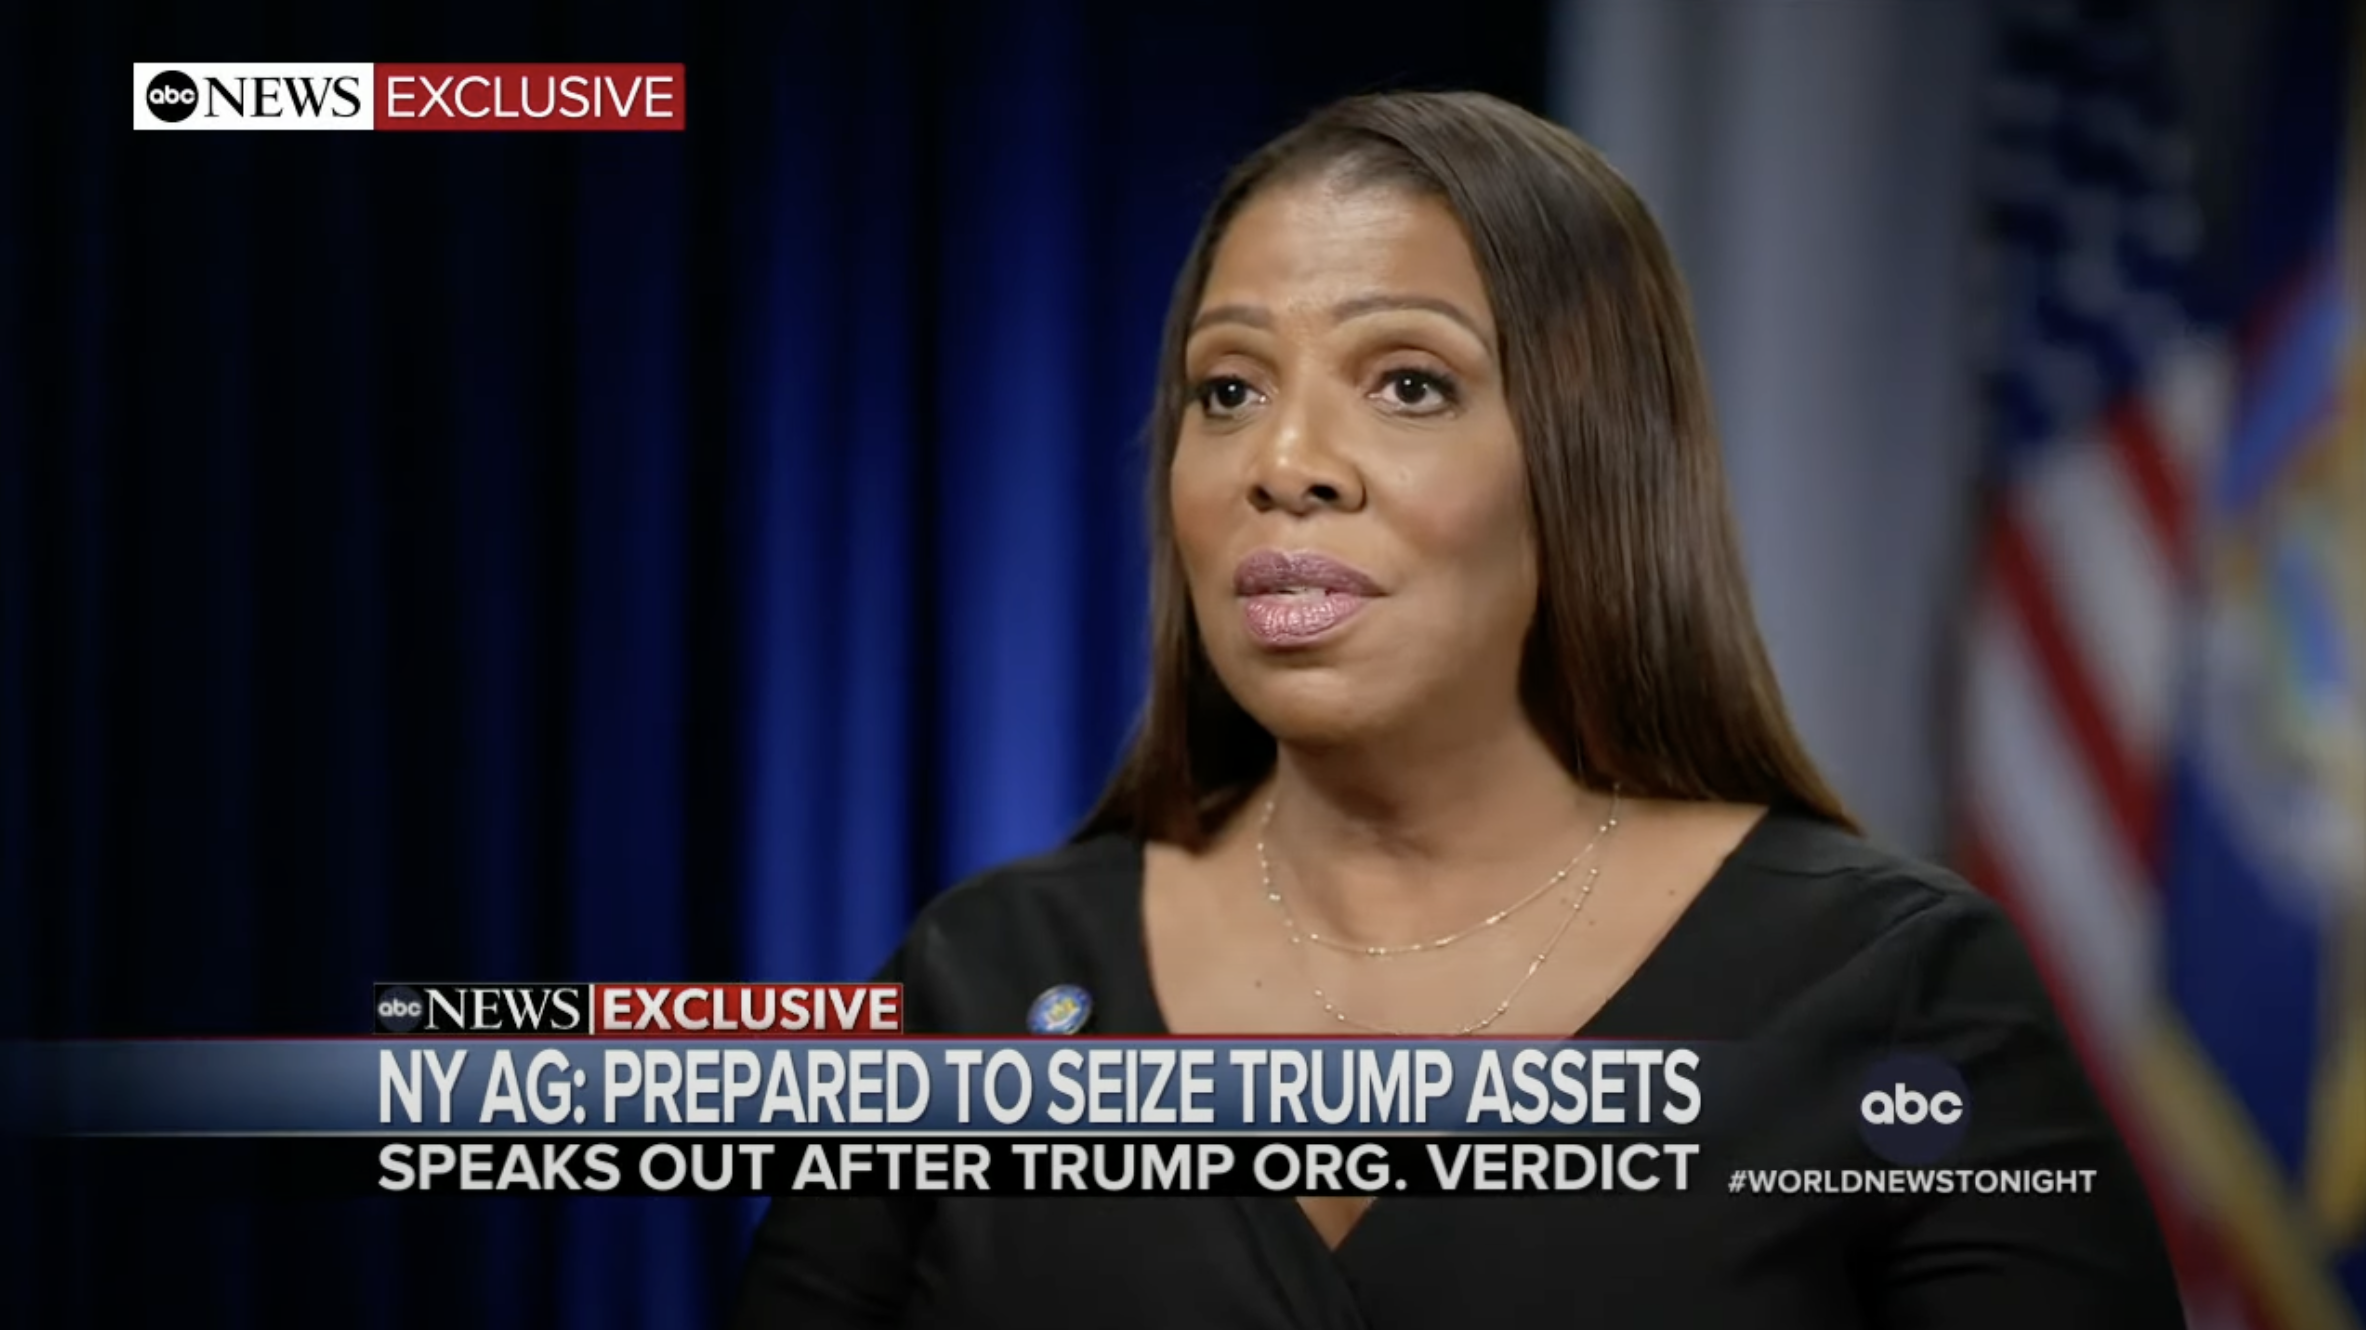 New York Attorney General Letitia James on ABC News.